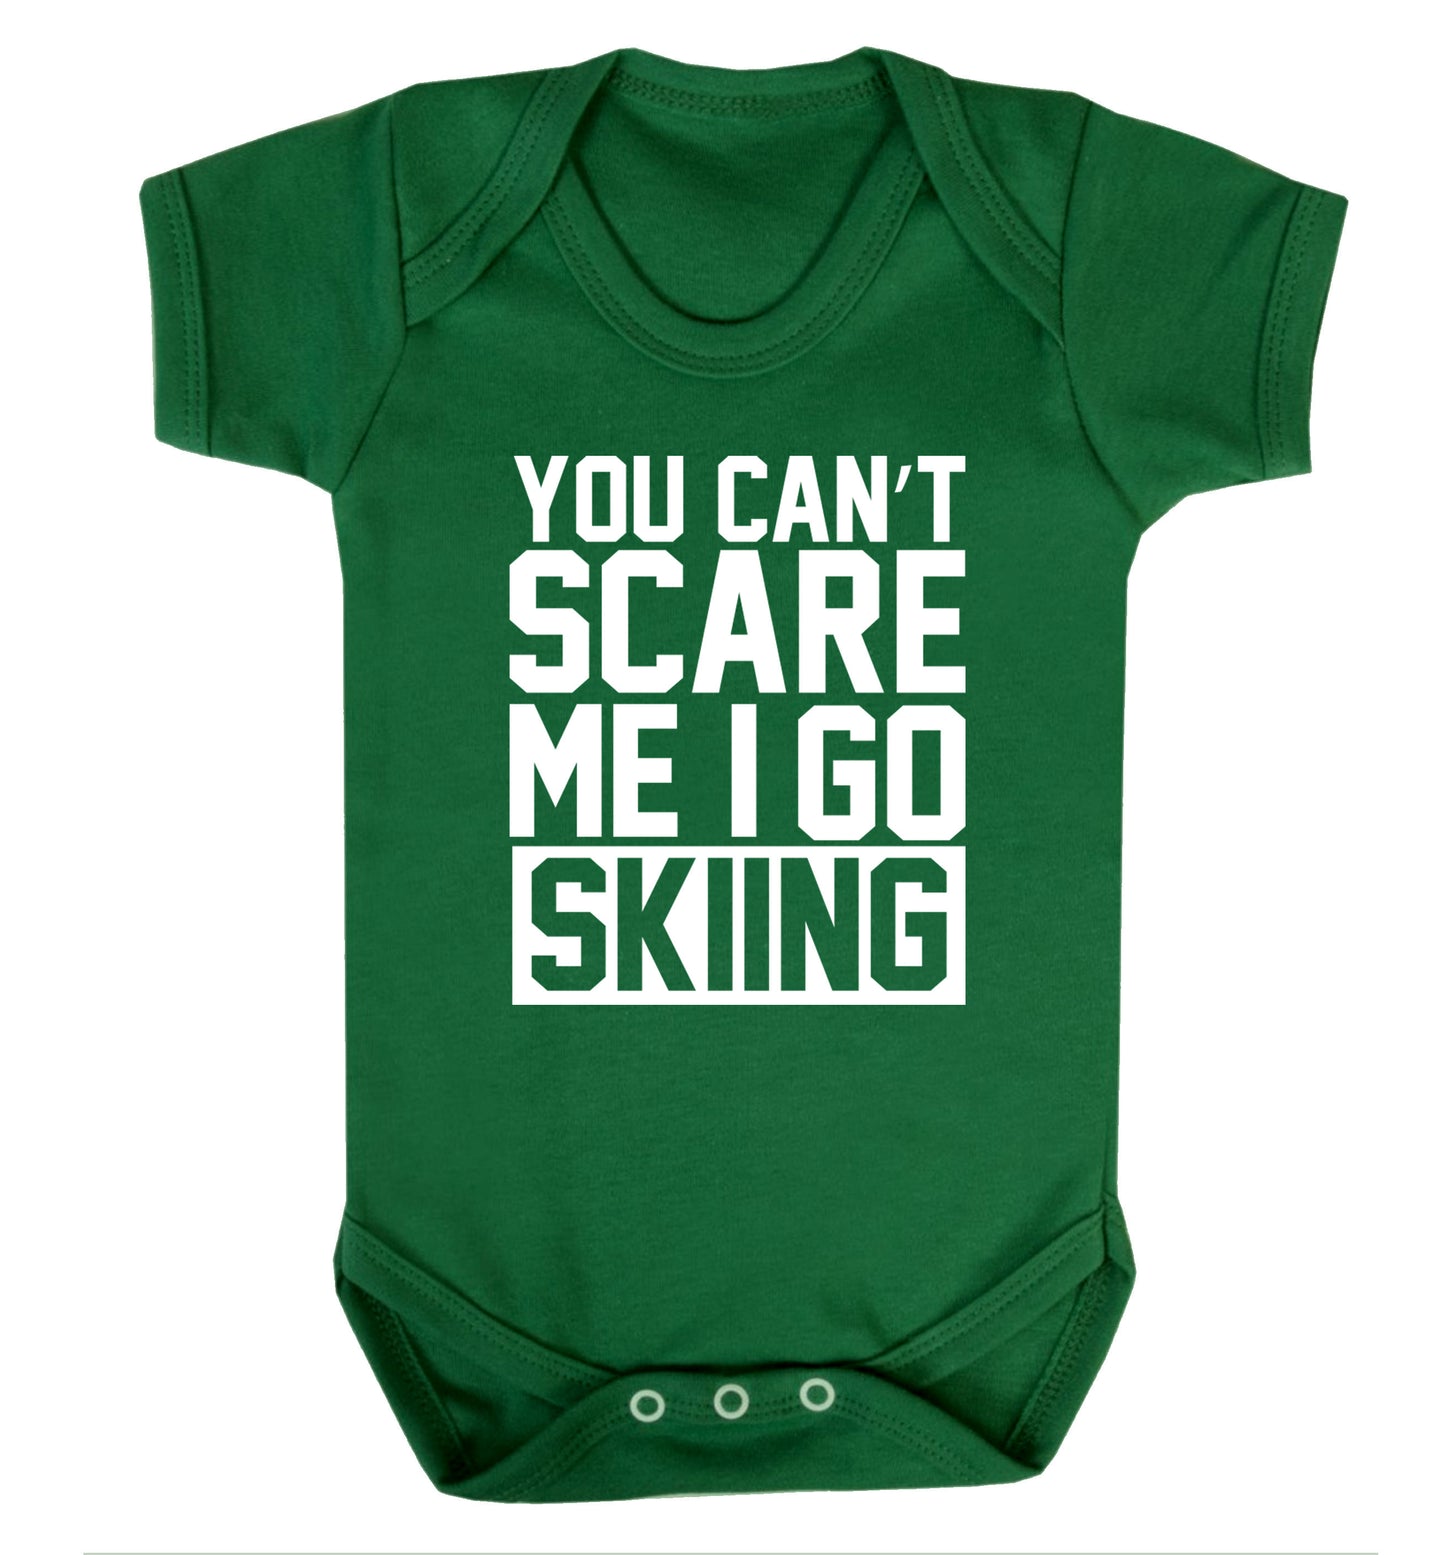 You can't scare me I go skiing Baby Vest green 18-24 months